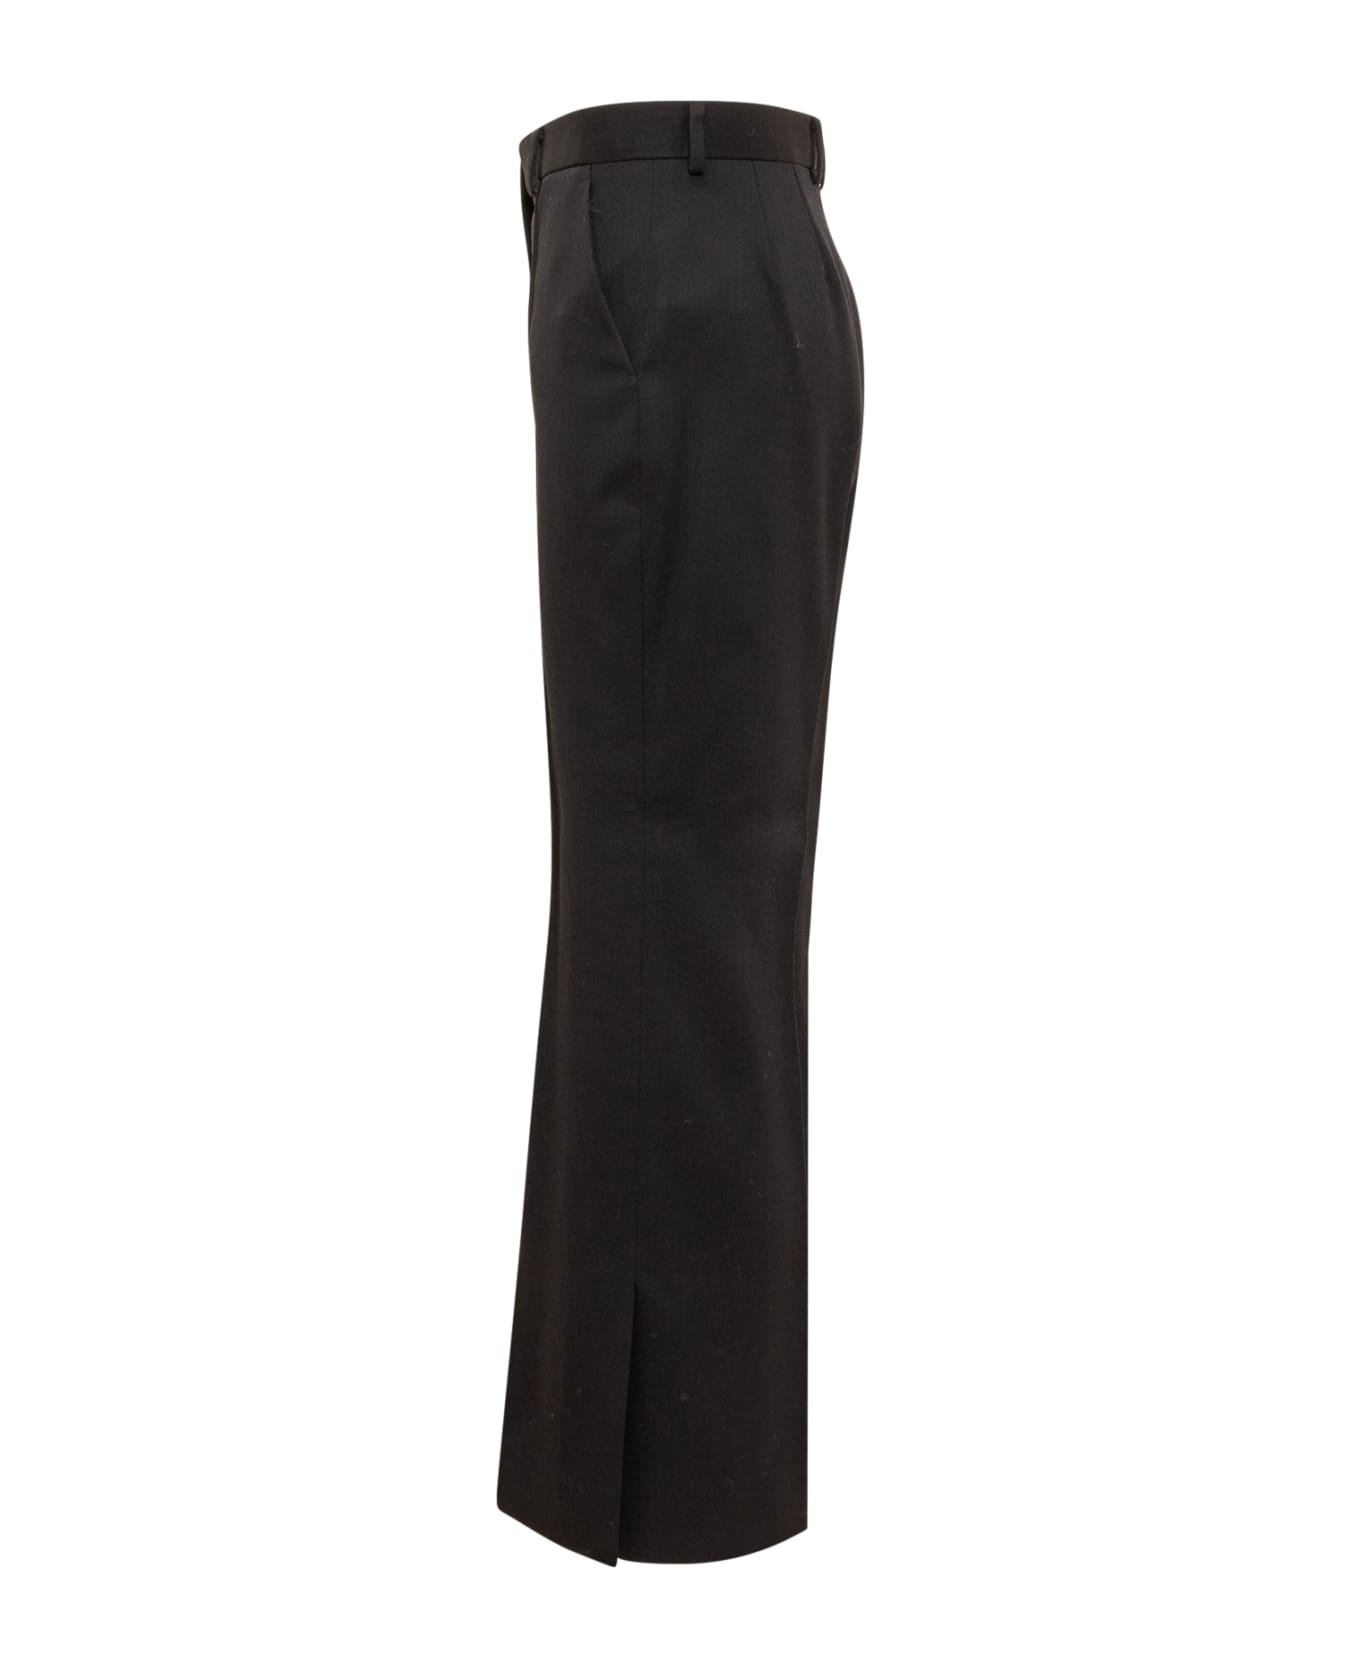 Lanvin Flared Trousers - BLACK ボトムス